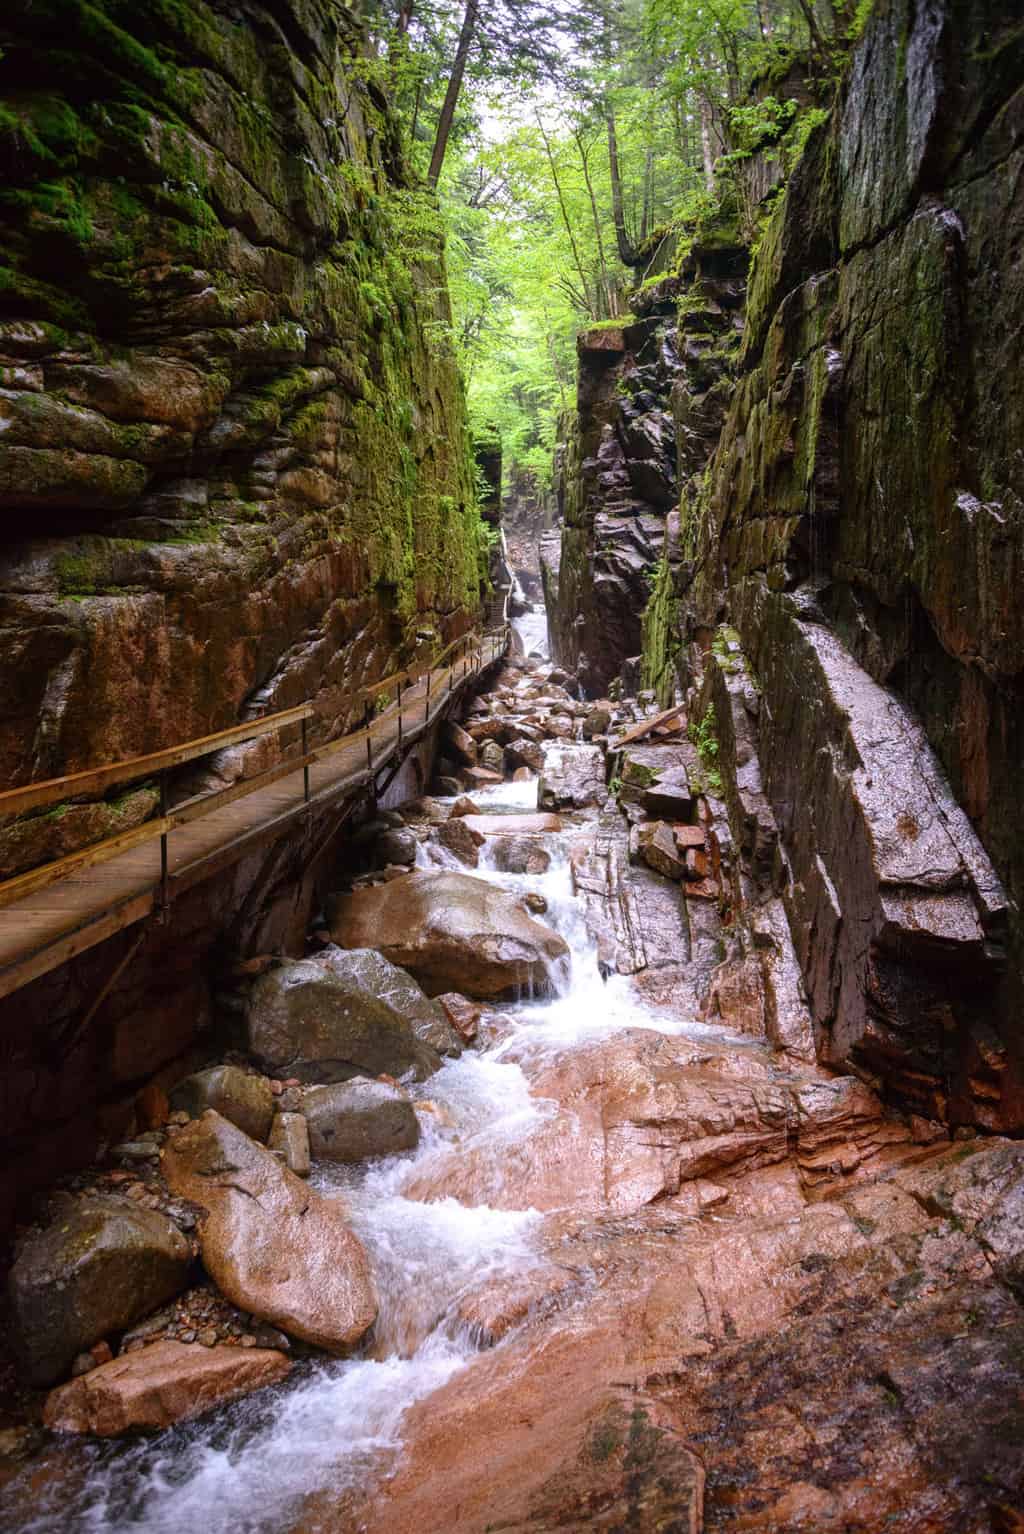 A narrow rocky gully with a stream running through and lush green vegetation.